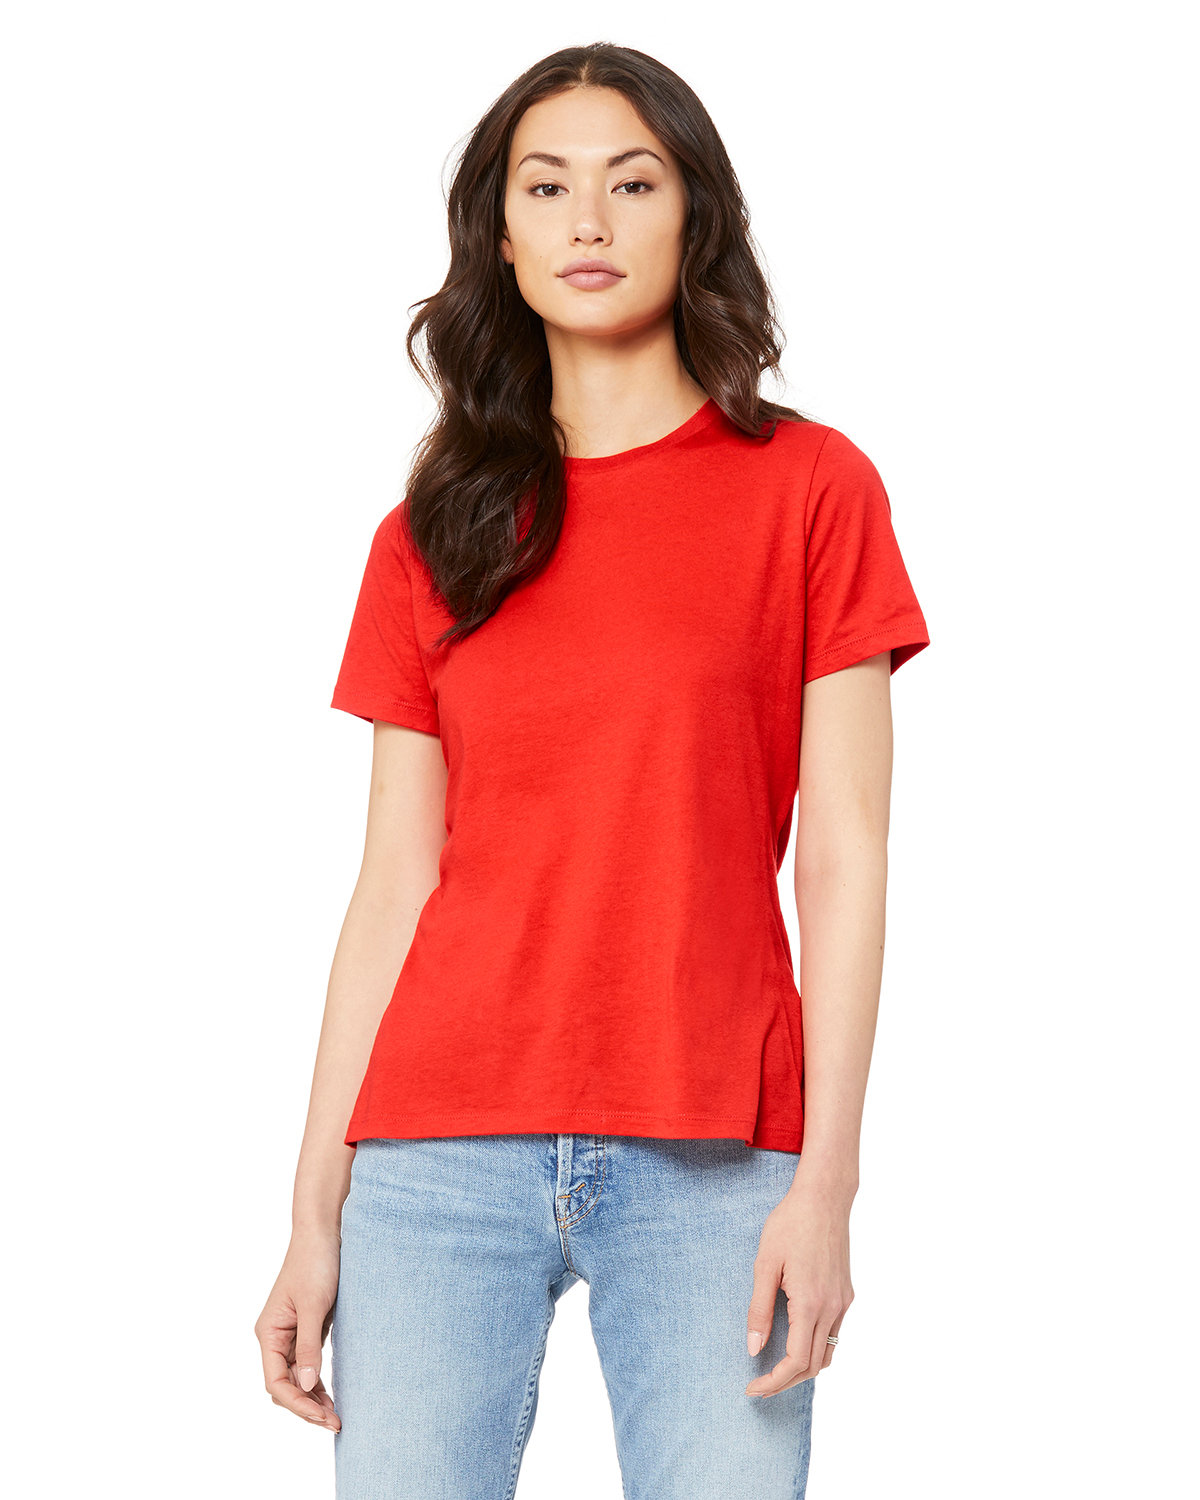 Bella + Canvas Ladies' Relaxed Jersey Short-Sleeve T-Shirt poppy 